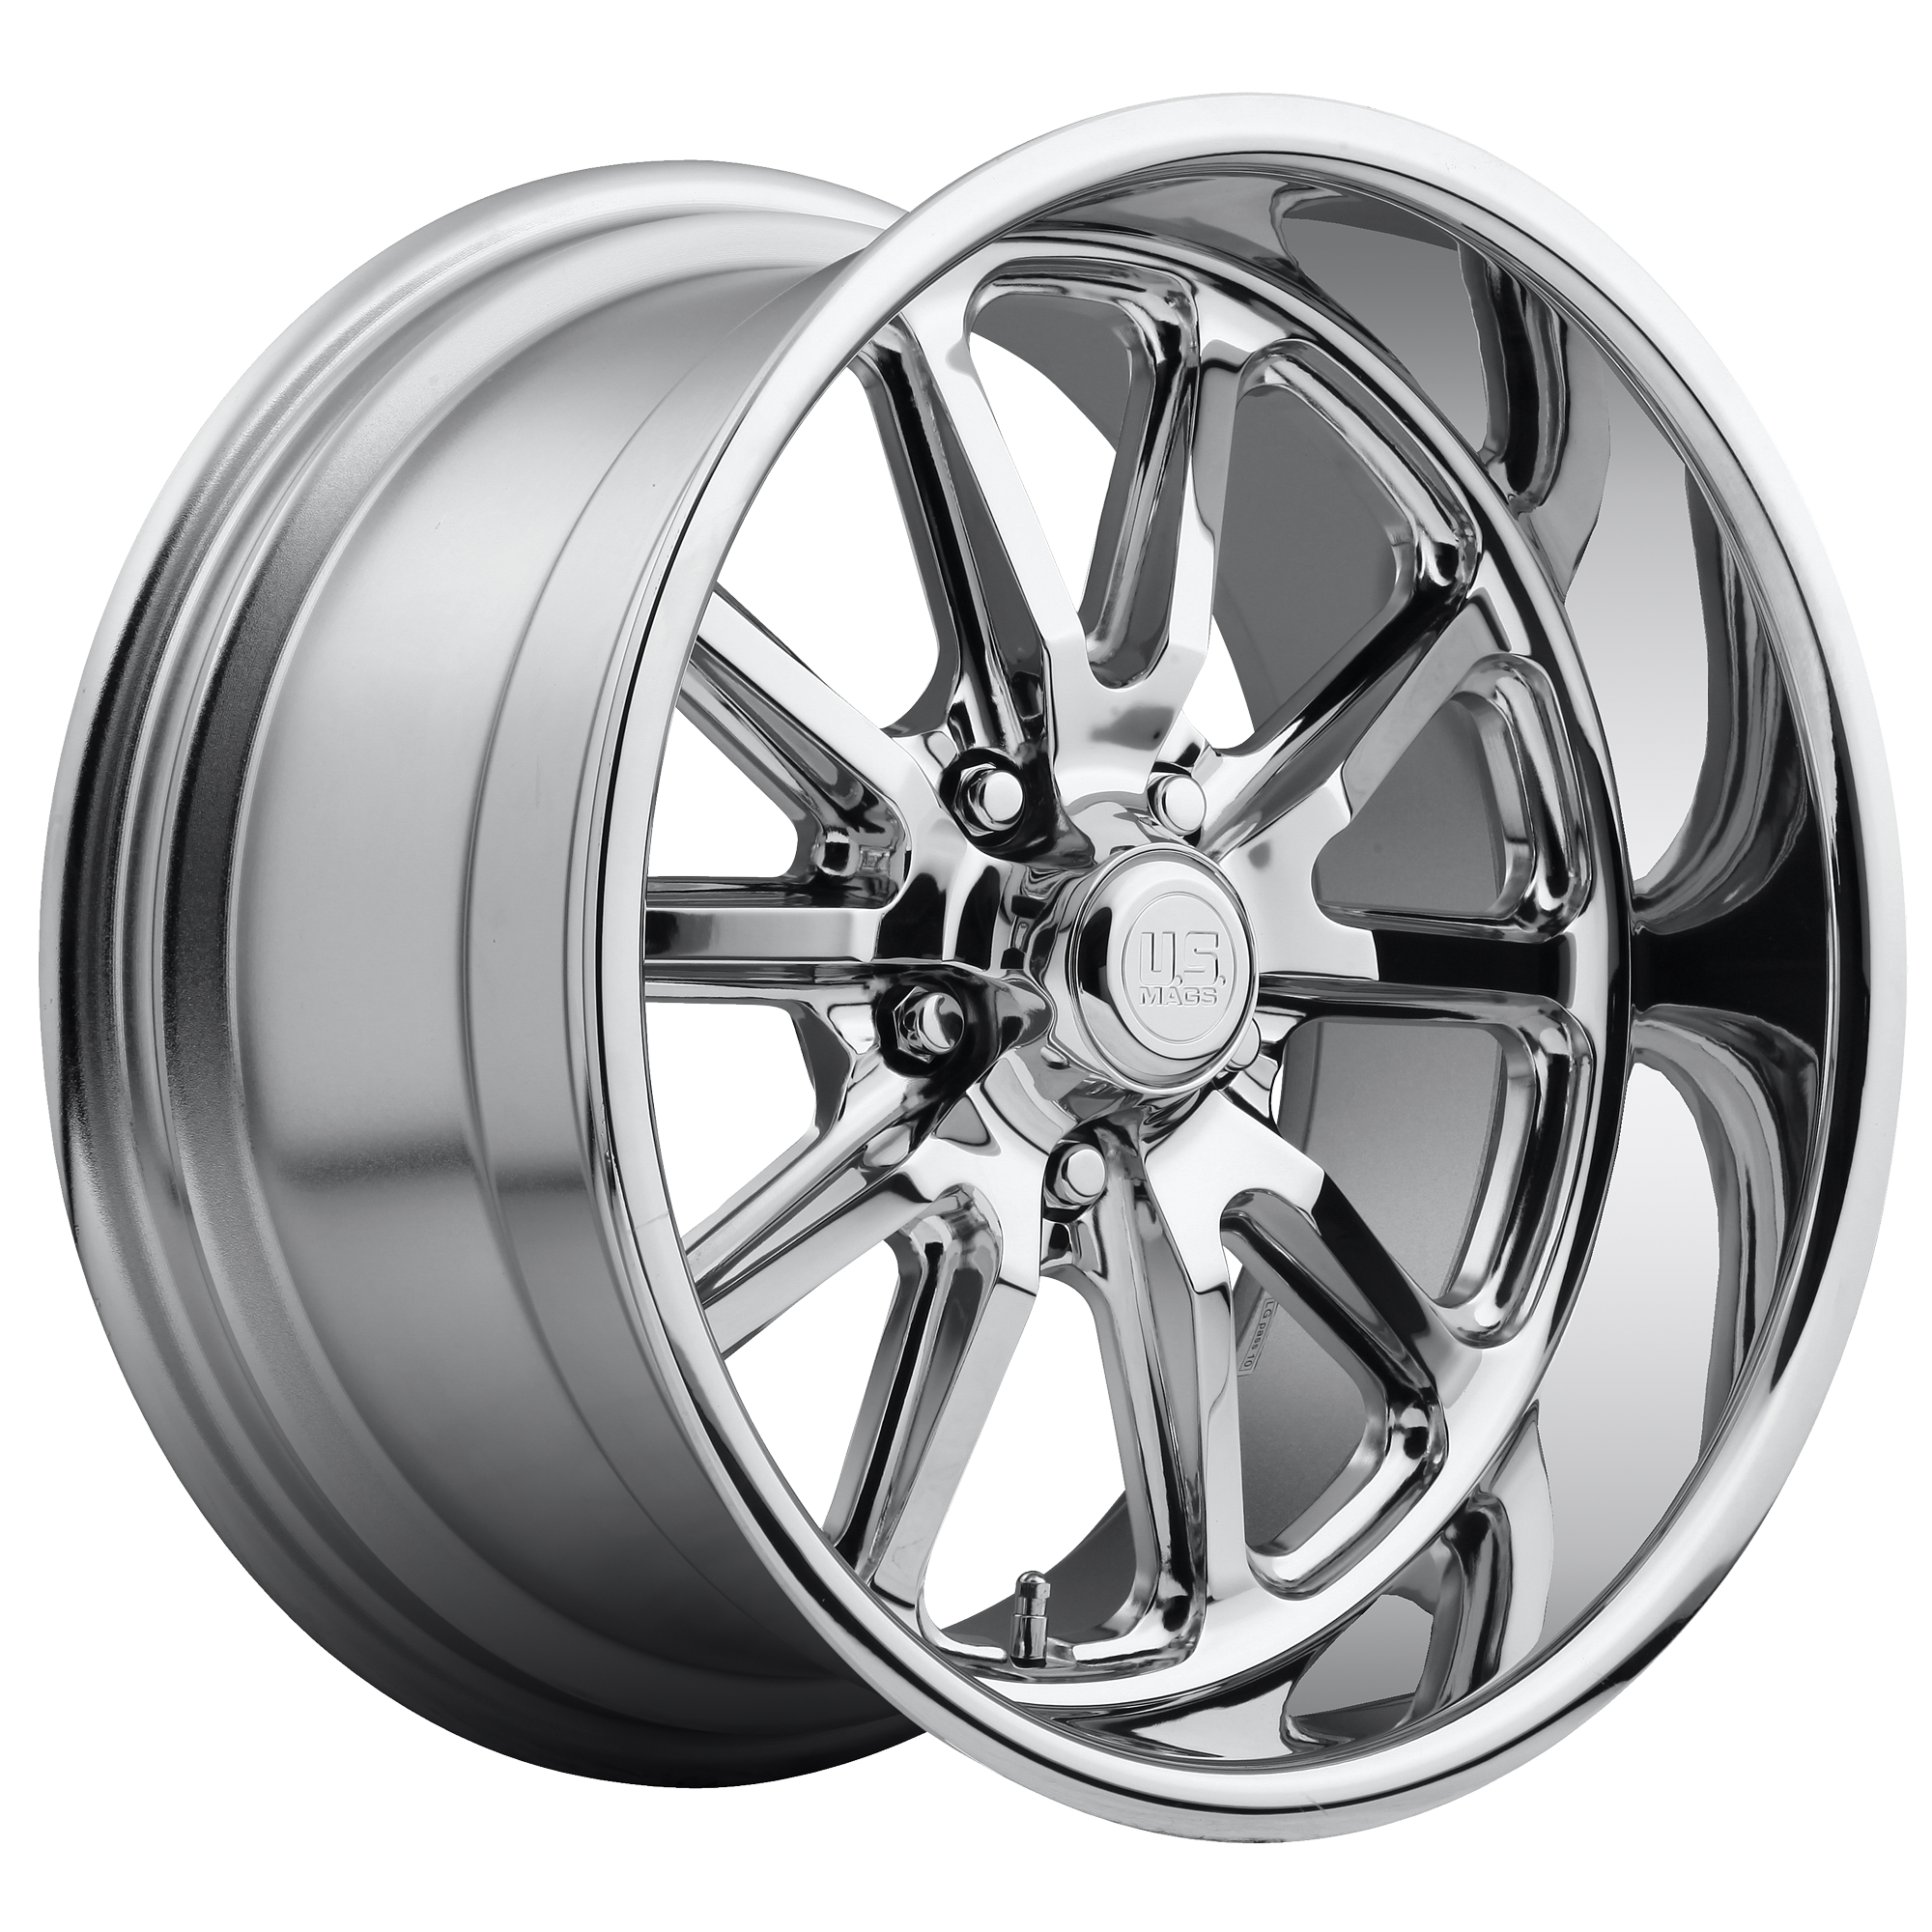 RAMBLER 18x8 5x120.65 CHROME PLATED (1 mm) - Tires and Engine Performance